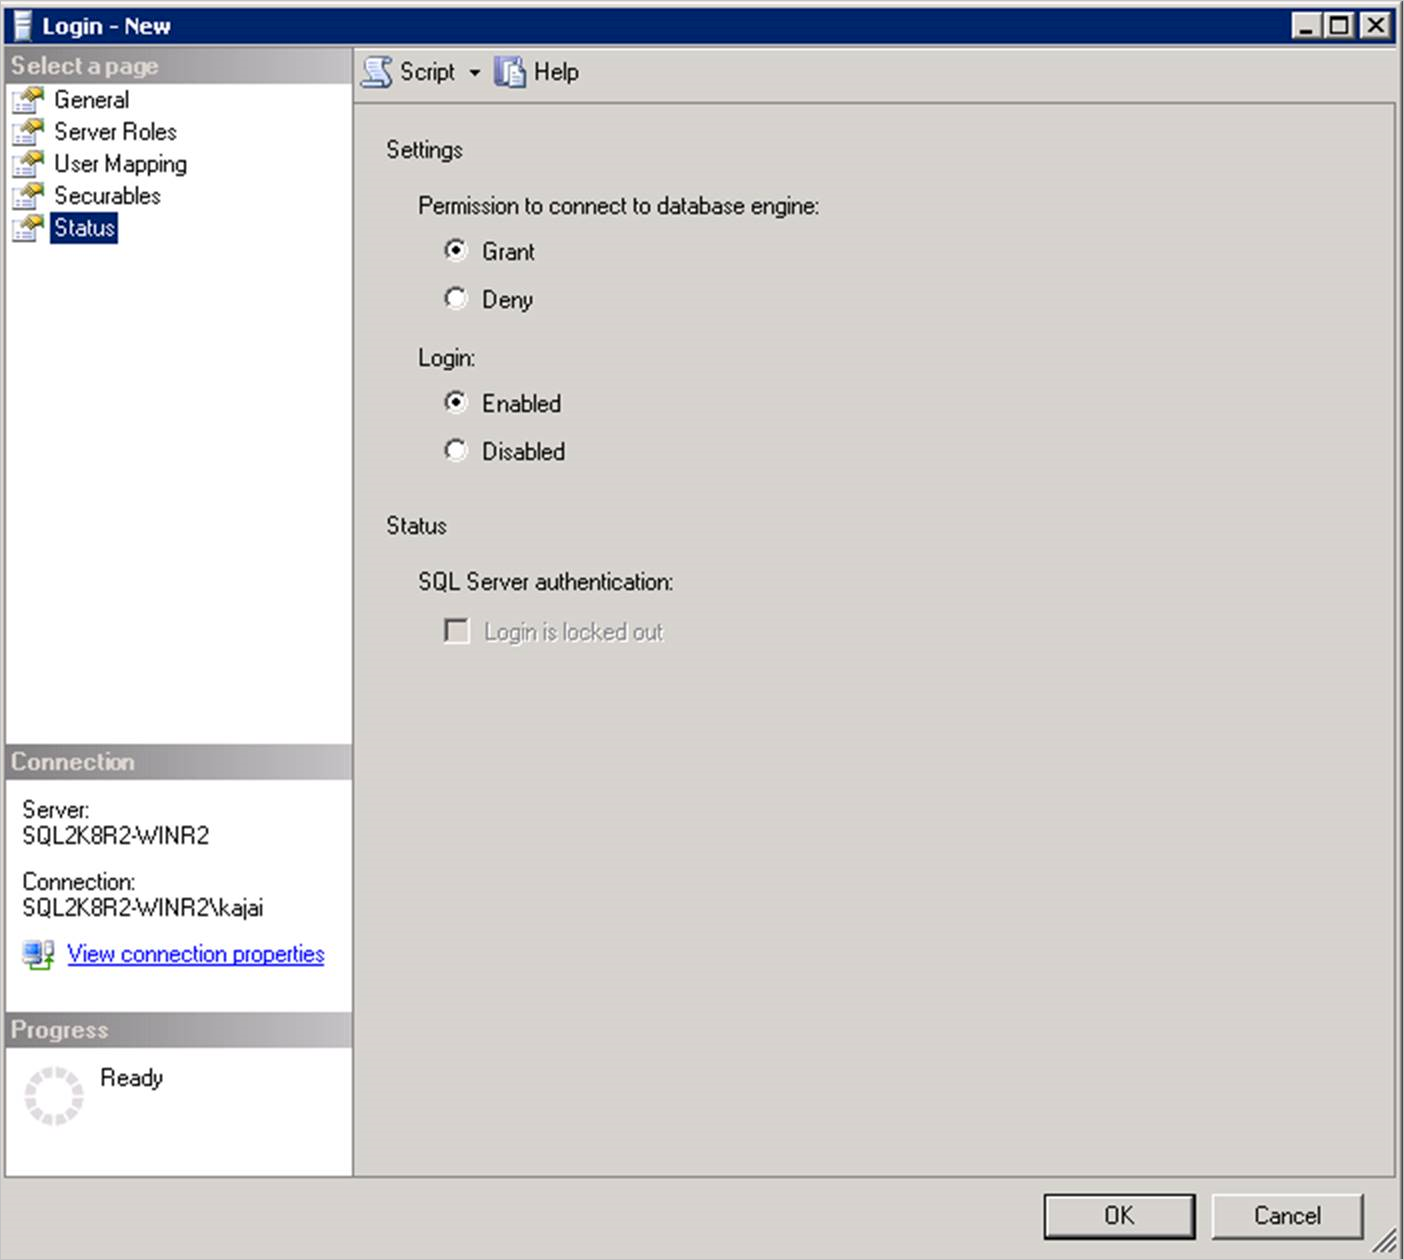 Grant permissions in SSMS